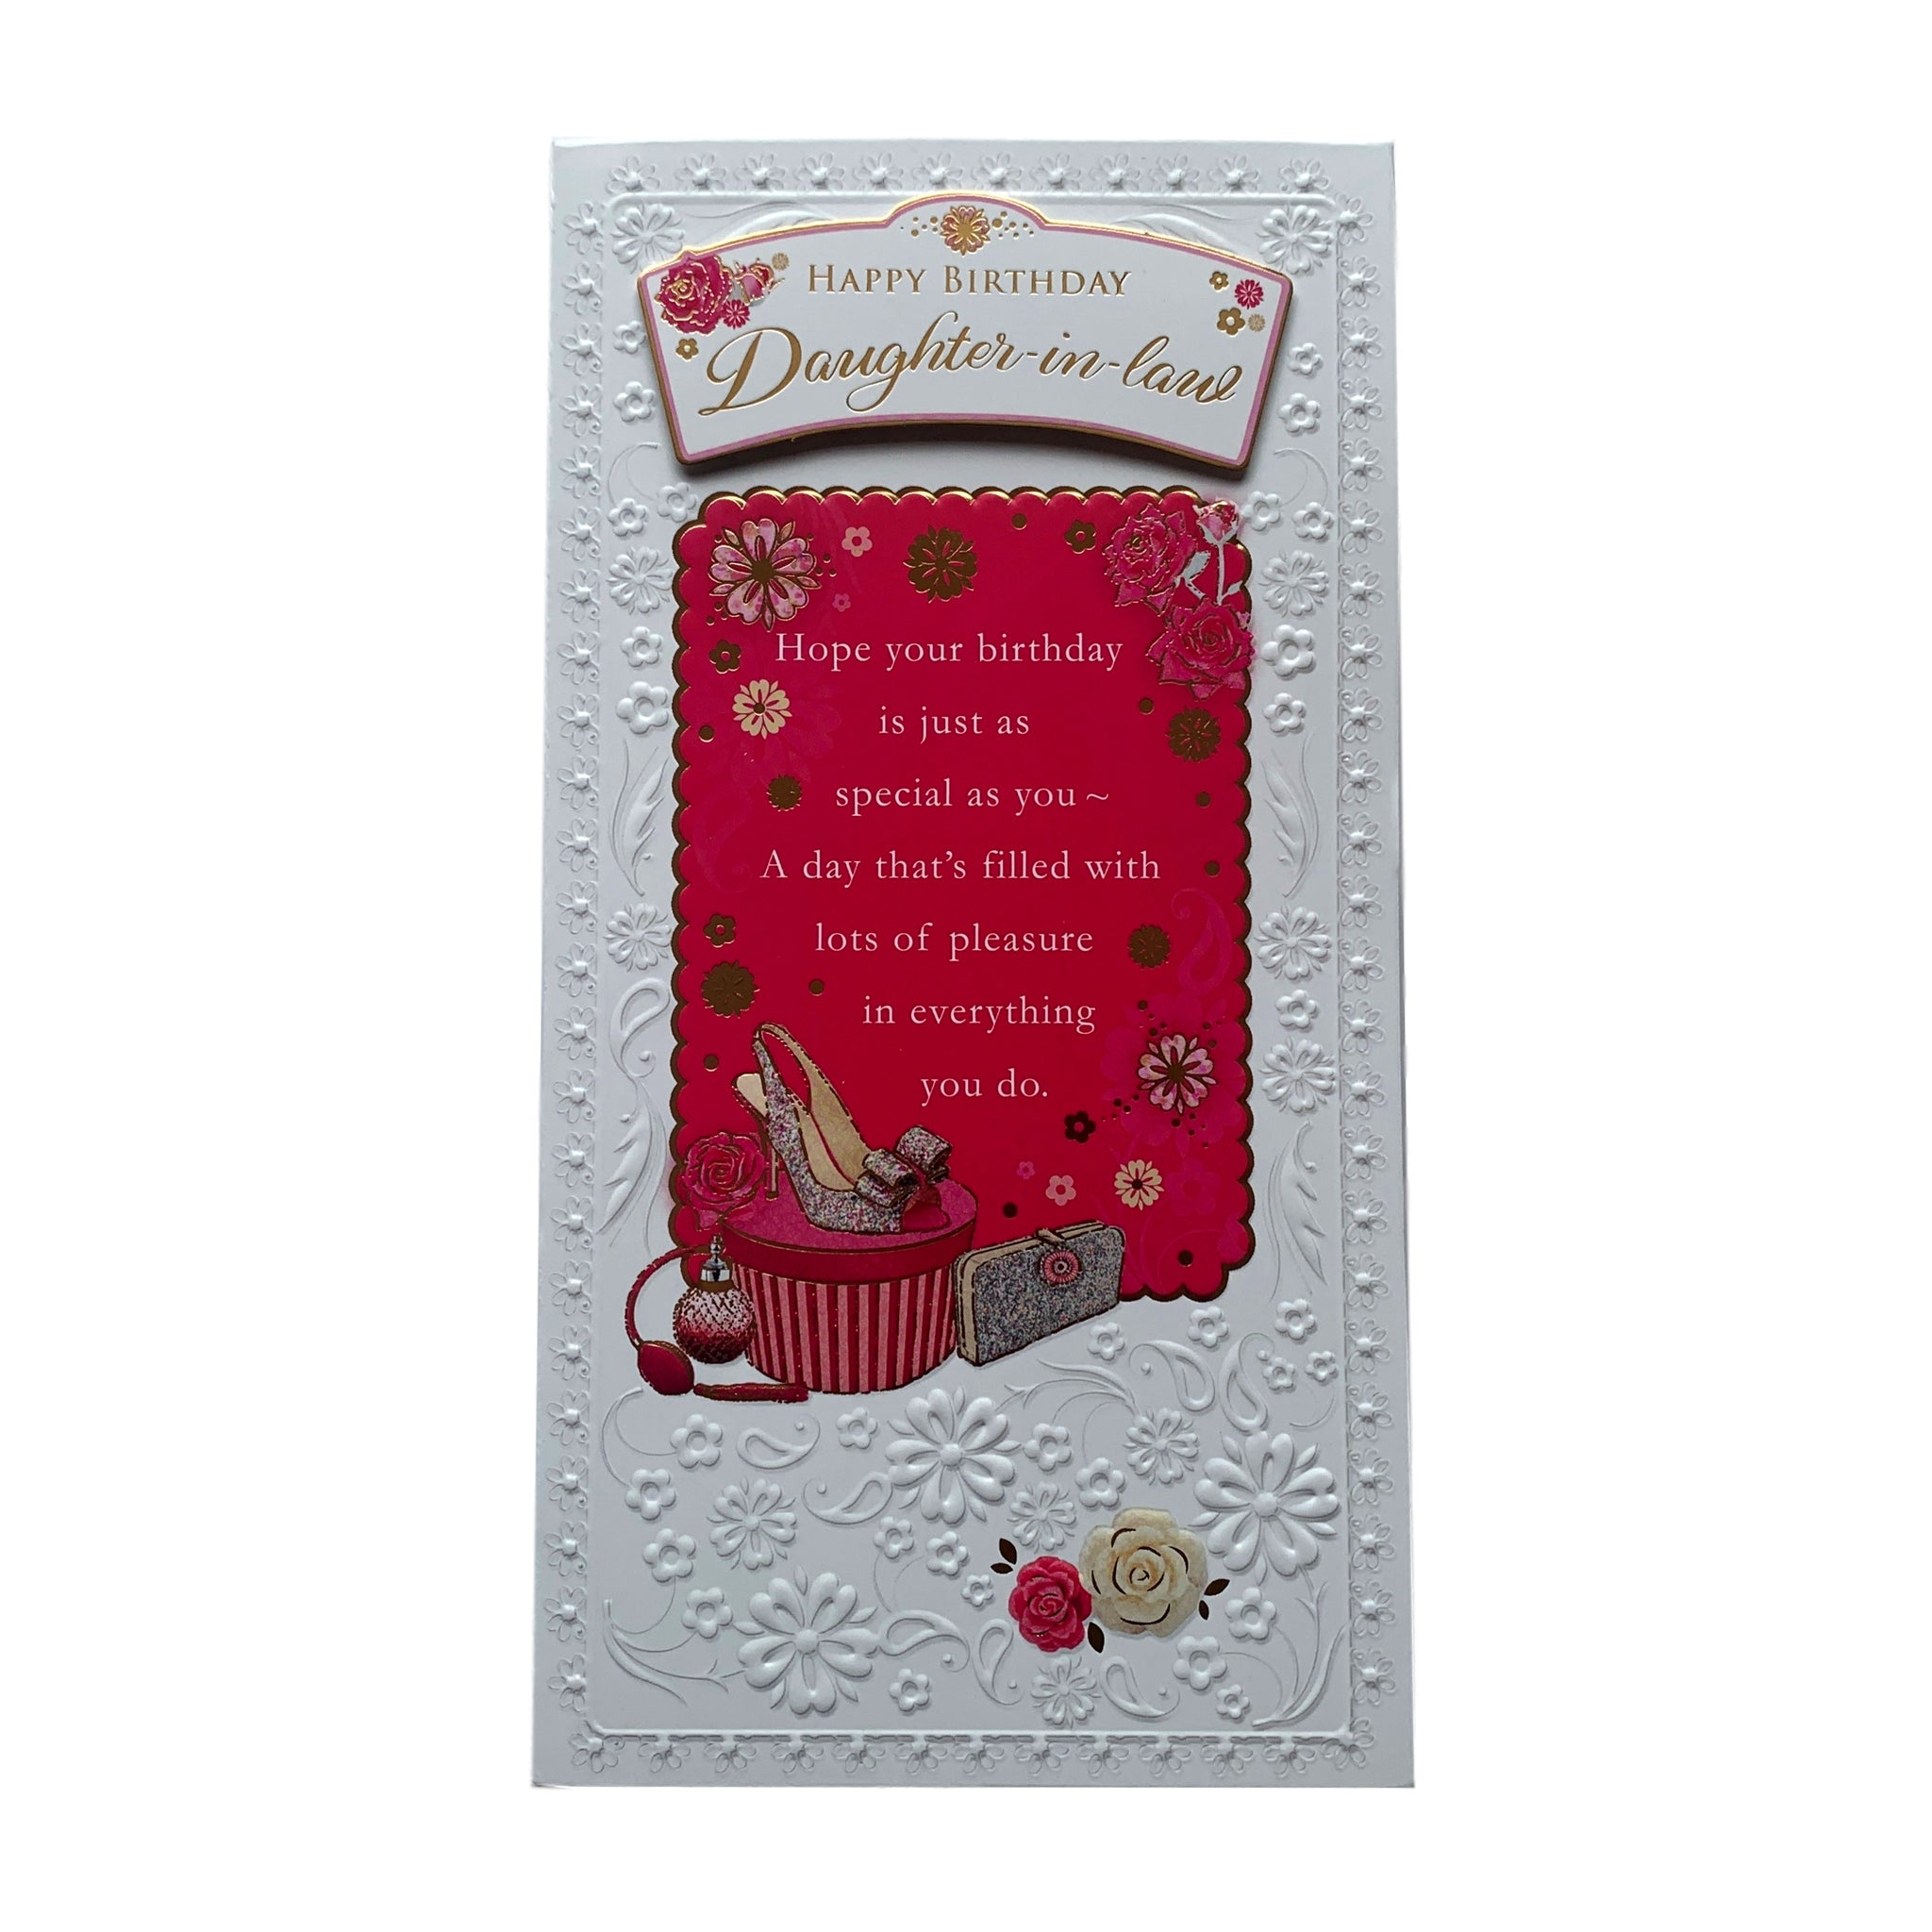 Happy Birthday Daughter-In-Law Soft Whispers Card